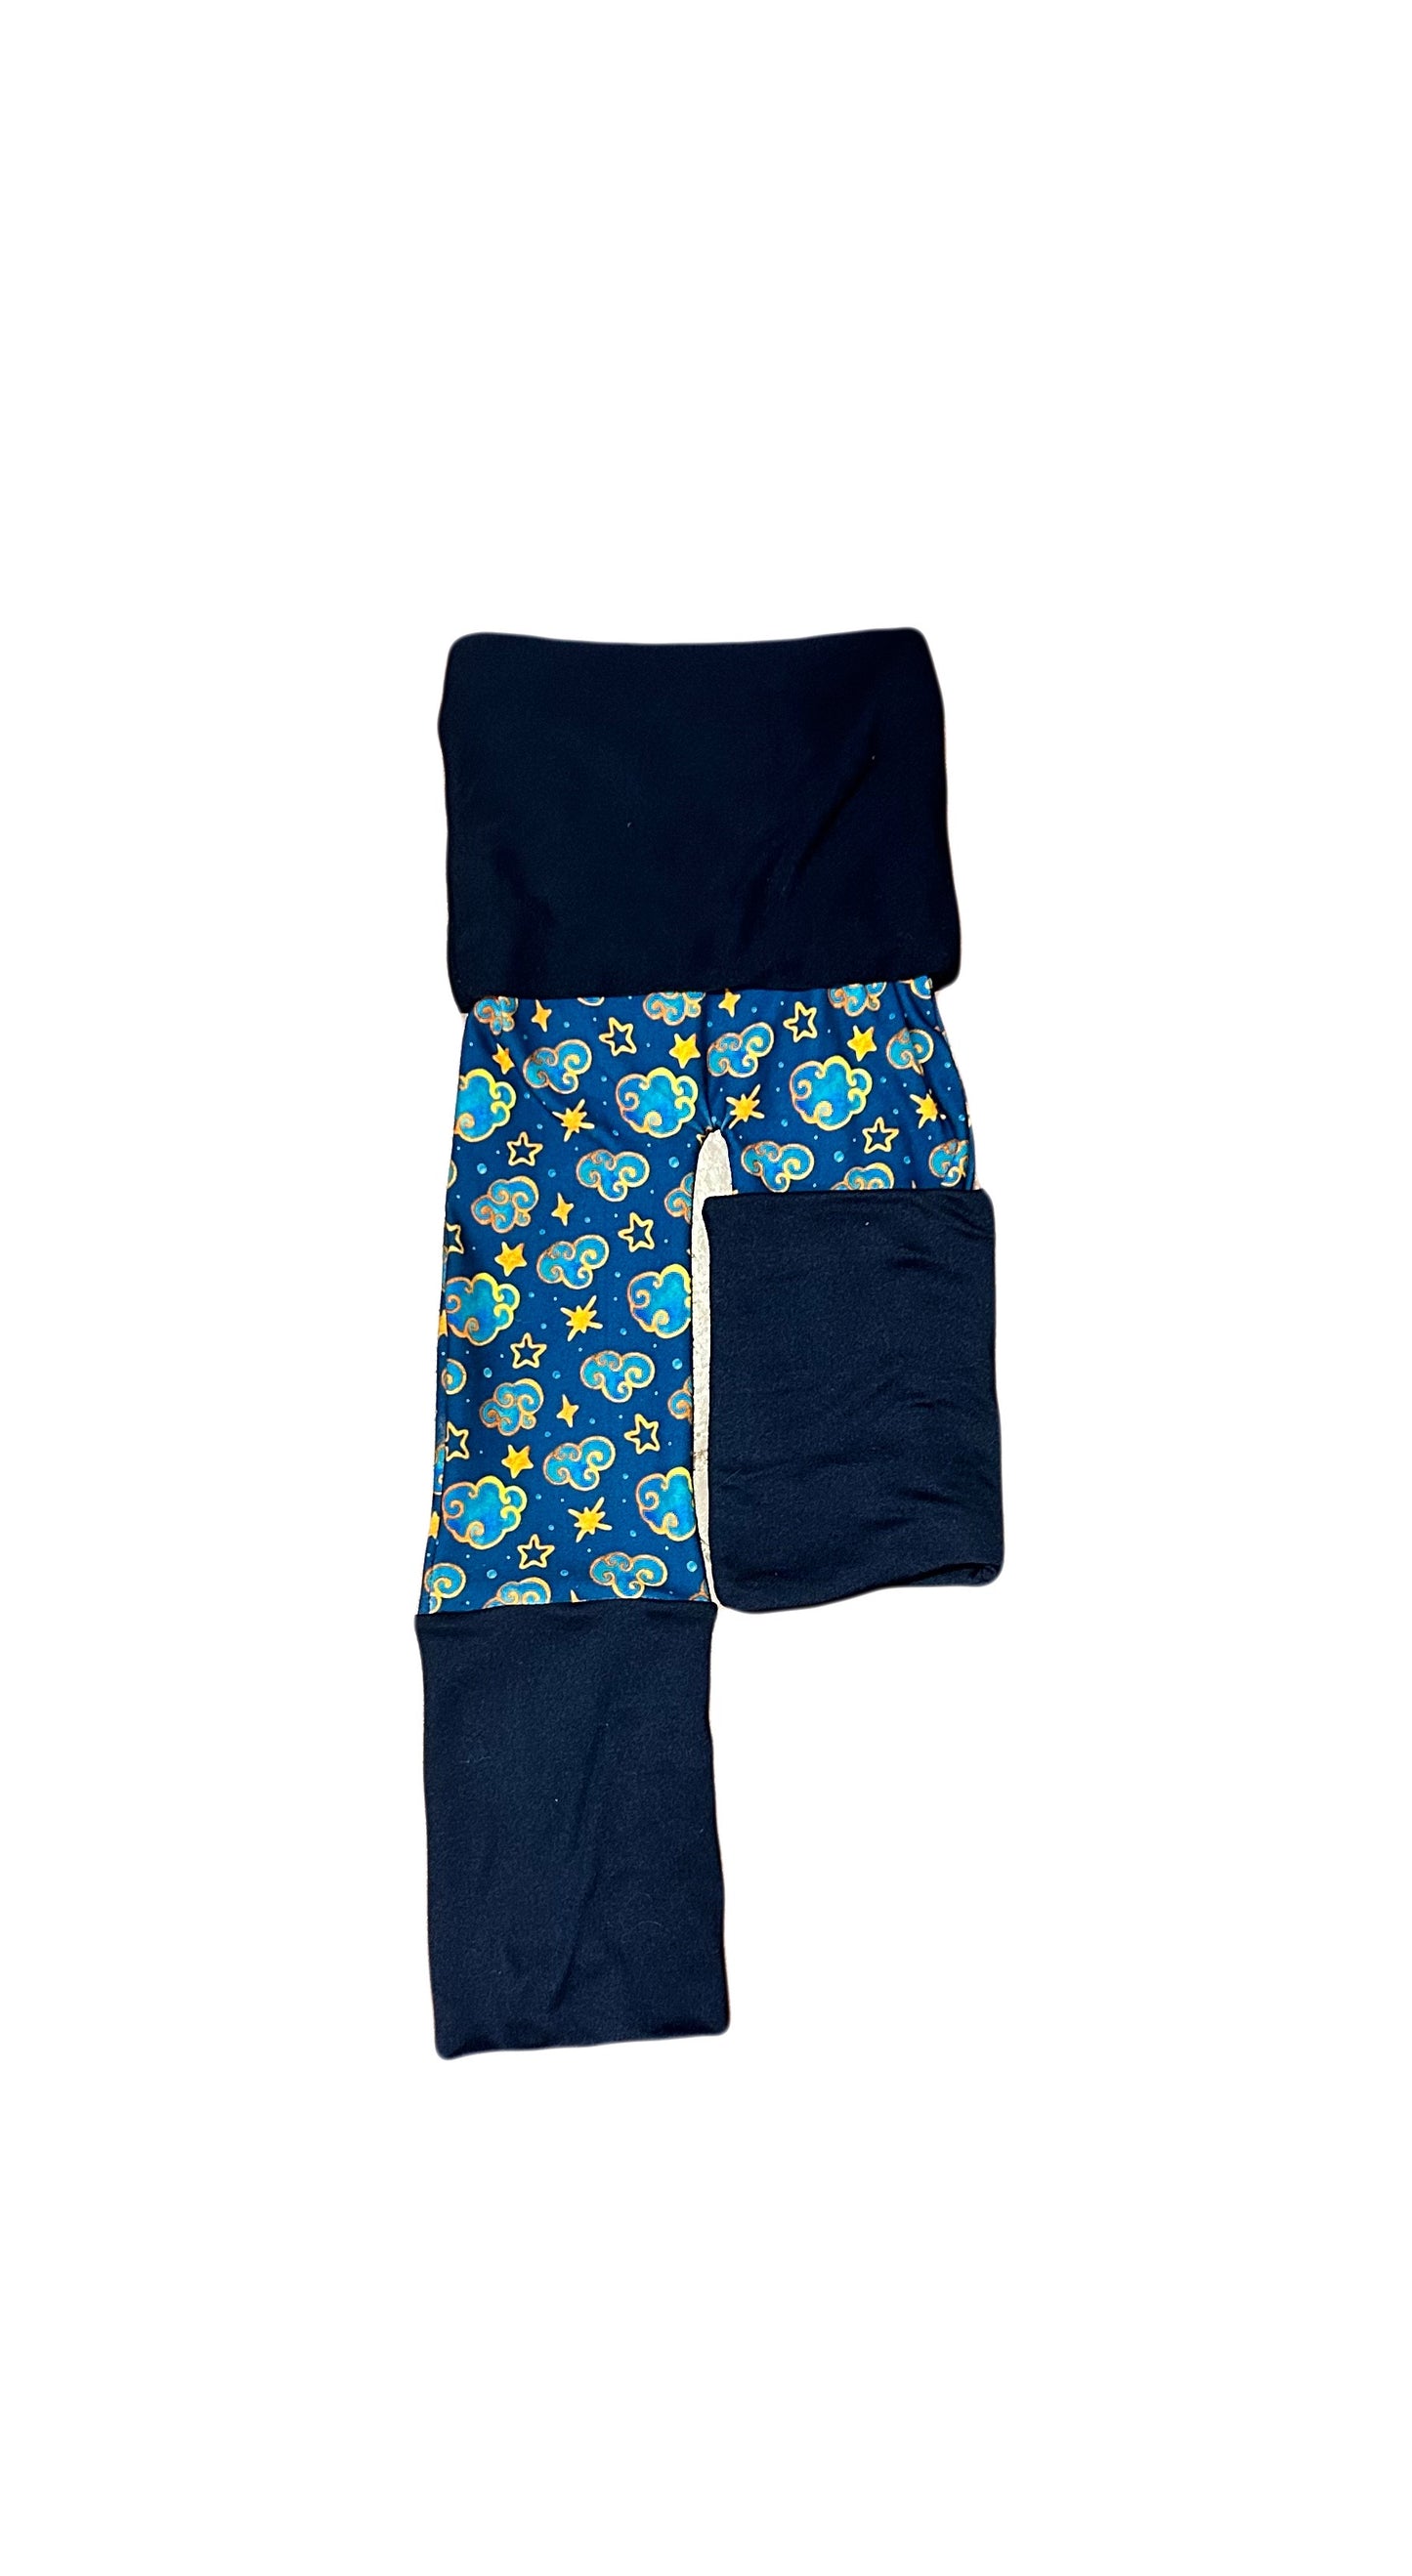 Adjustable Pants - Clouds with Deep Blue